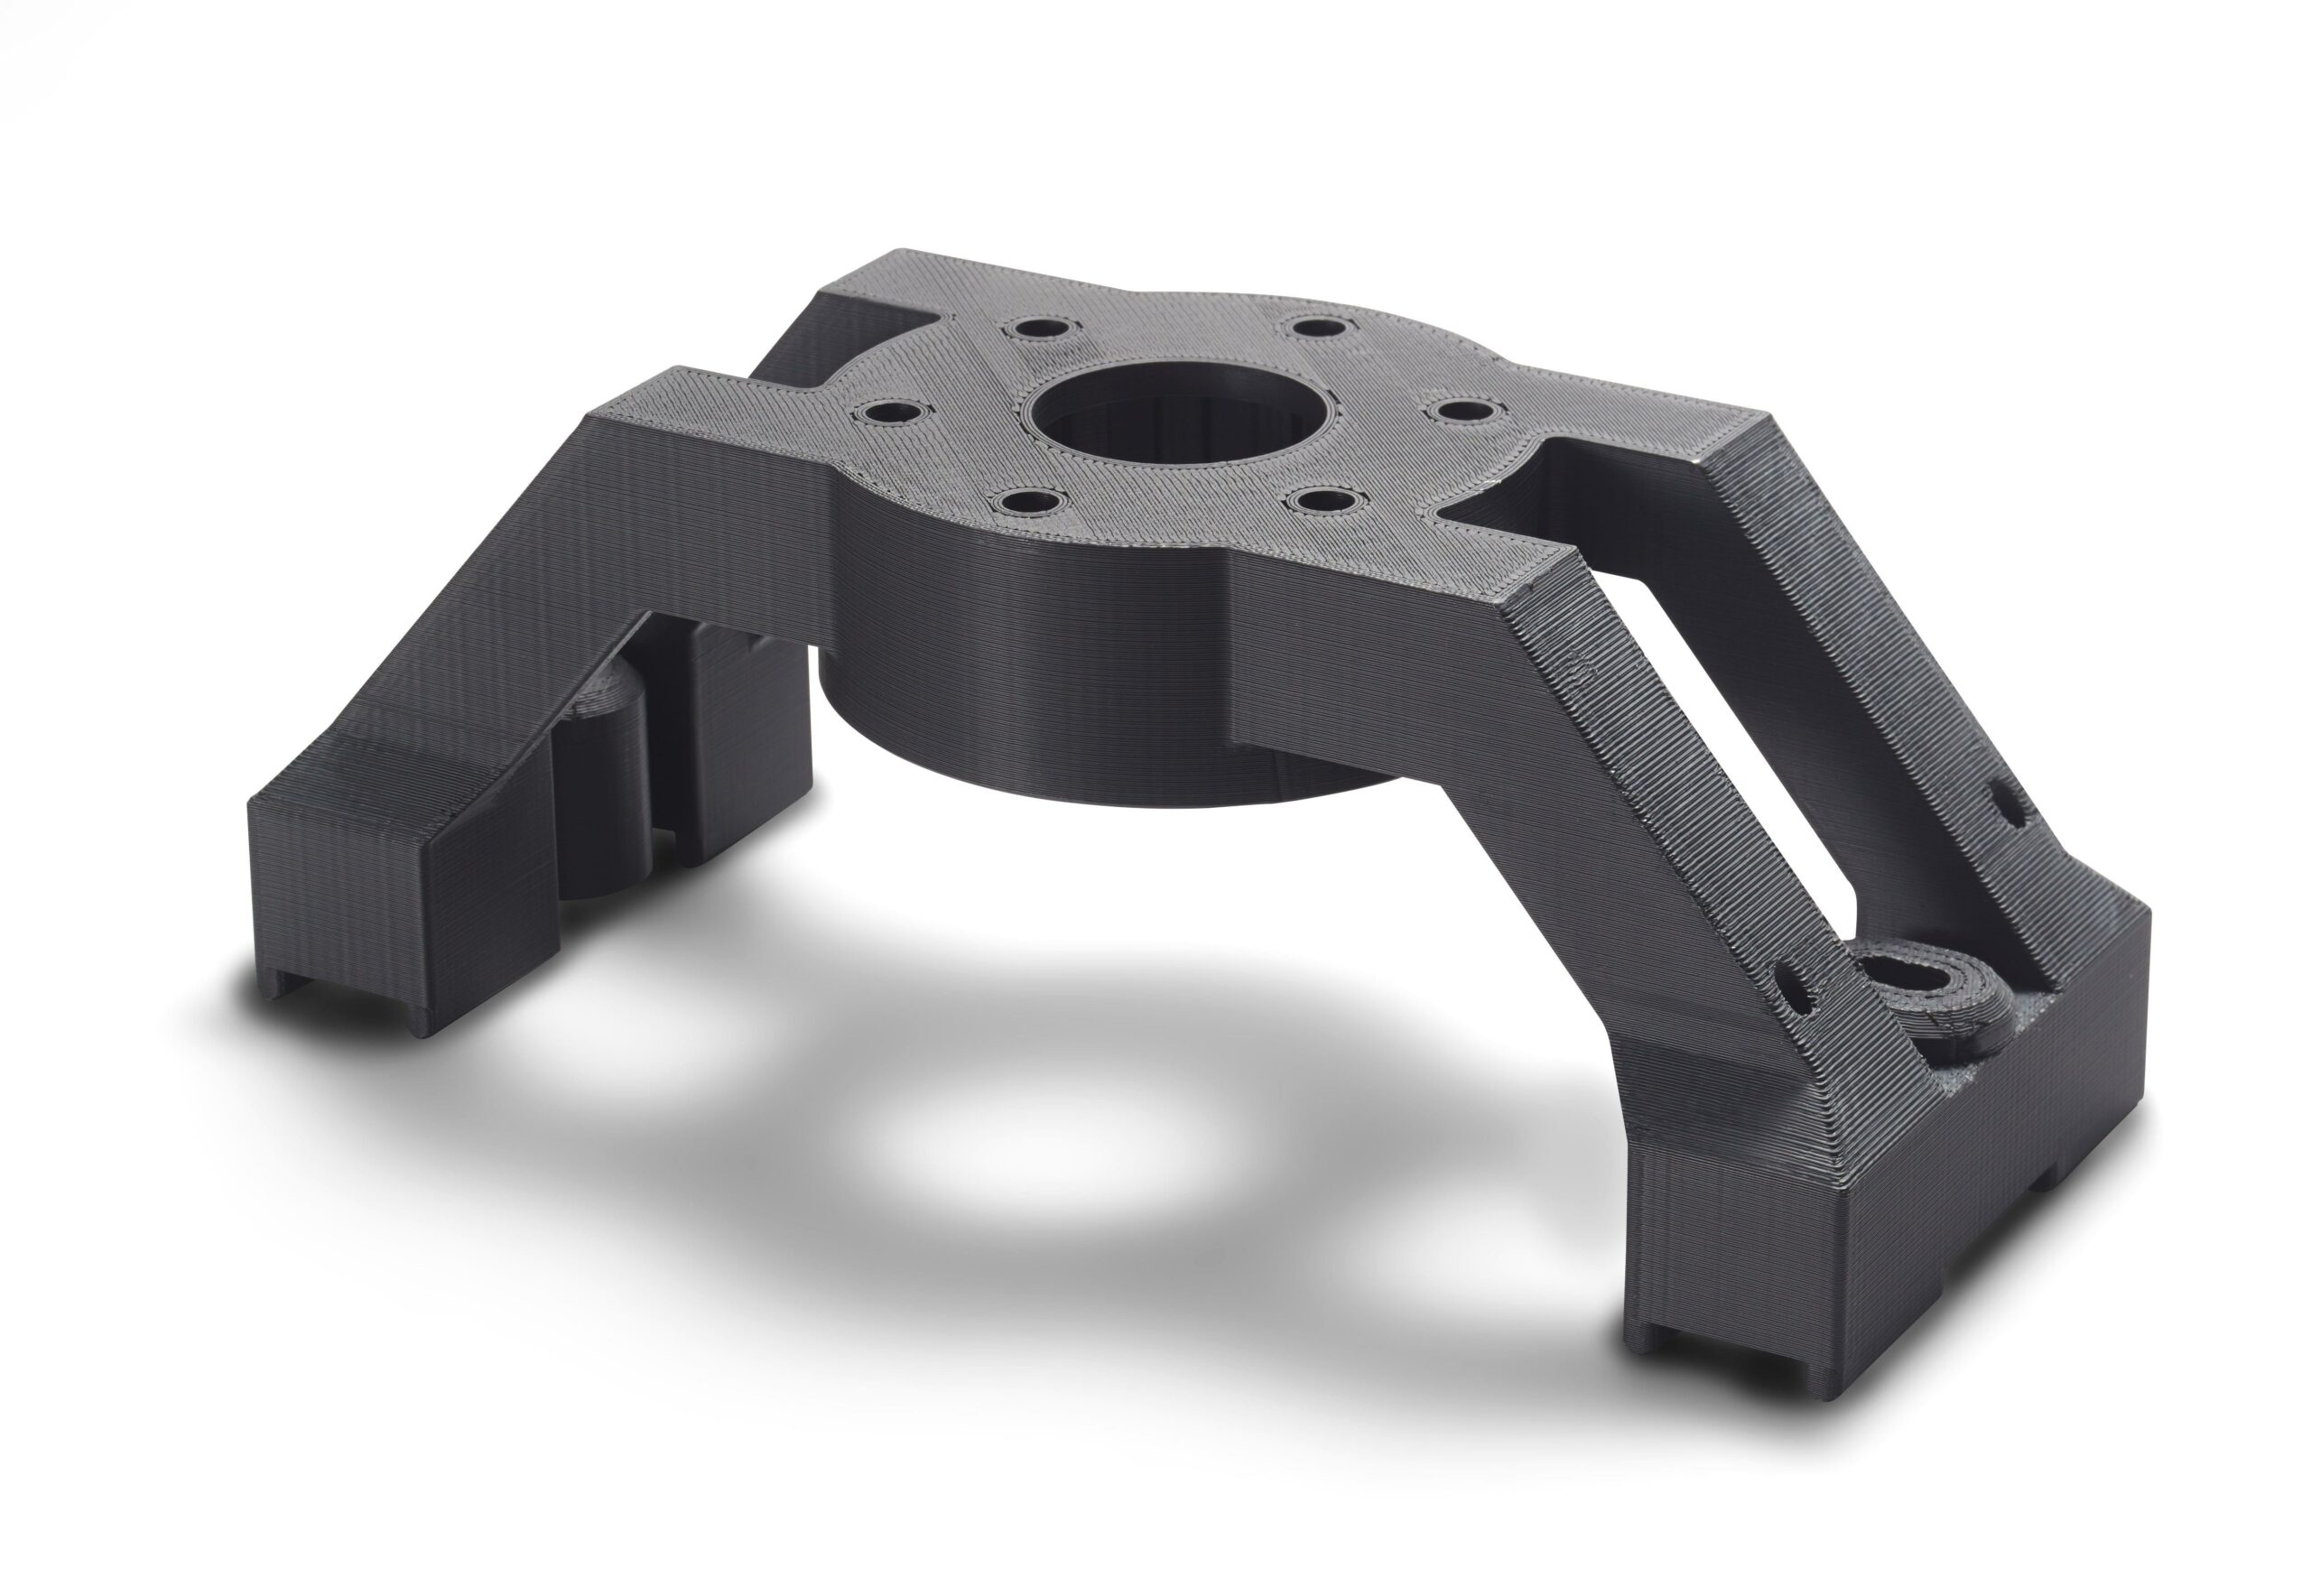 Robot-arm end printed in Diran, a smooth Nylon-based filament. (Image courtesy Stratasys)